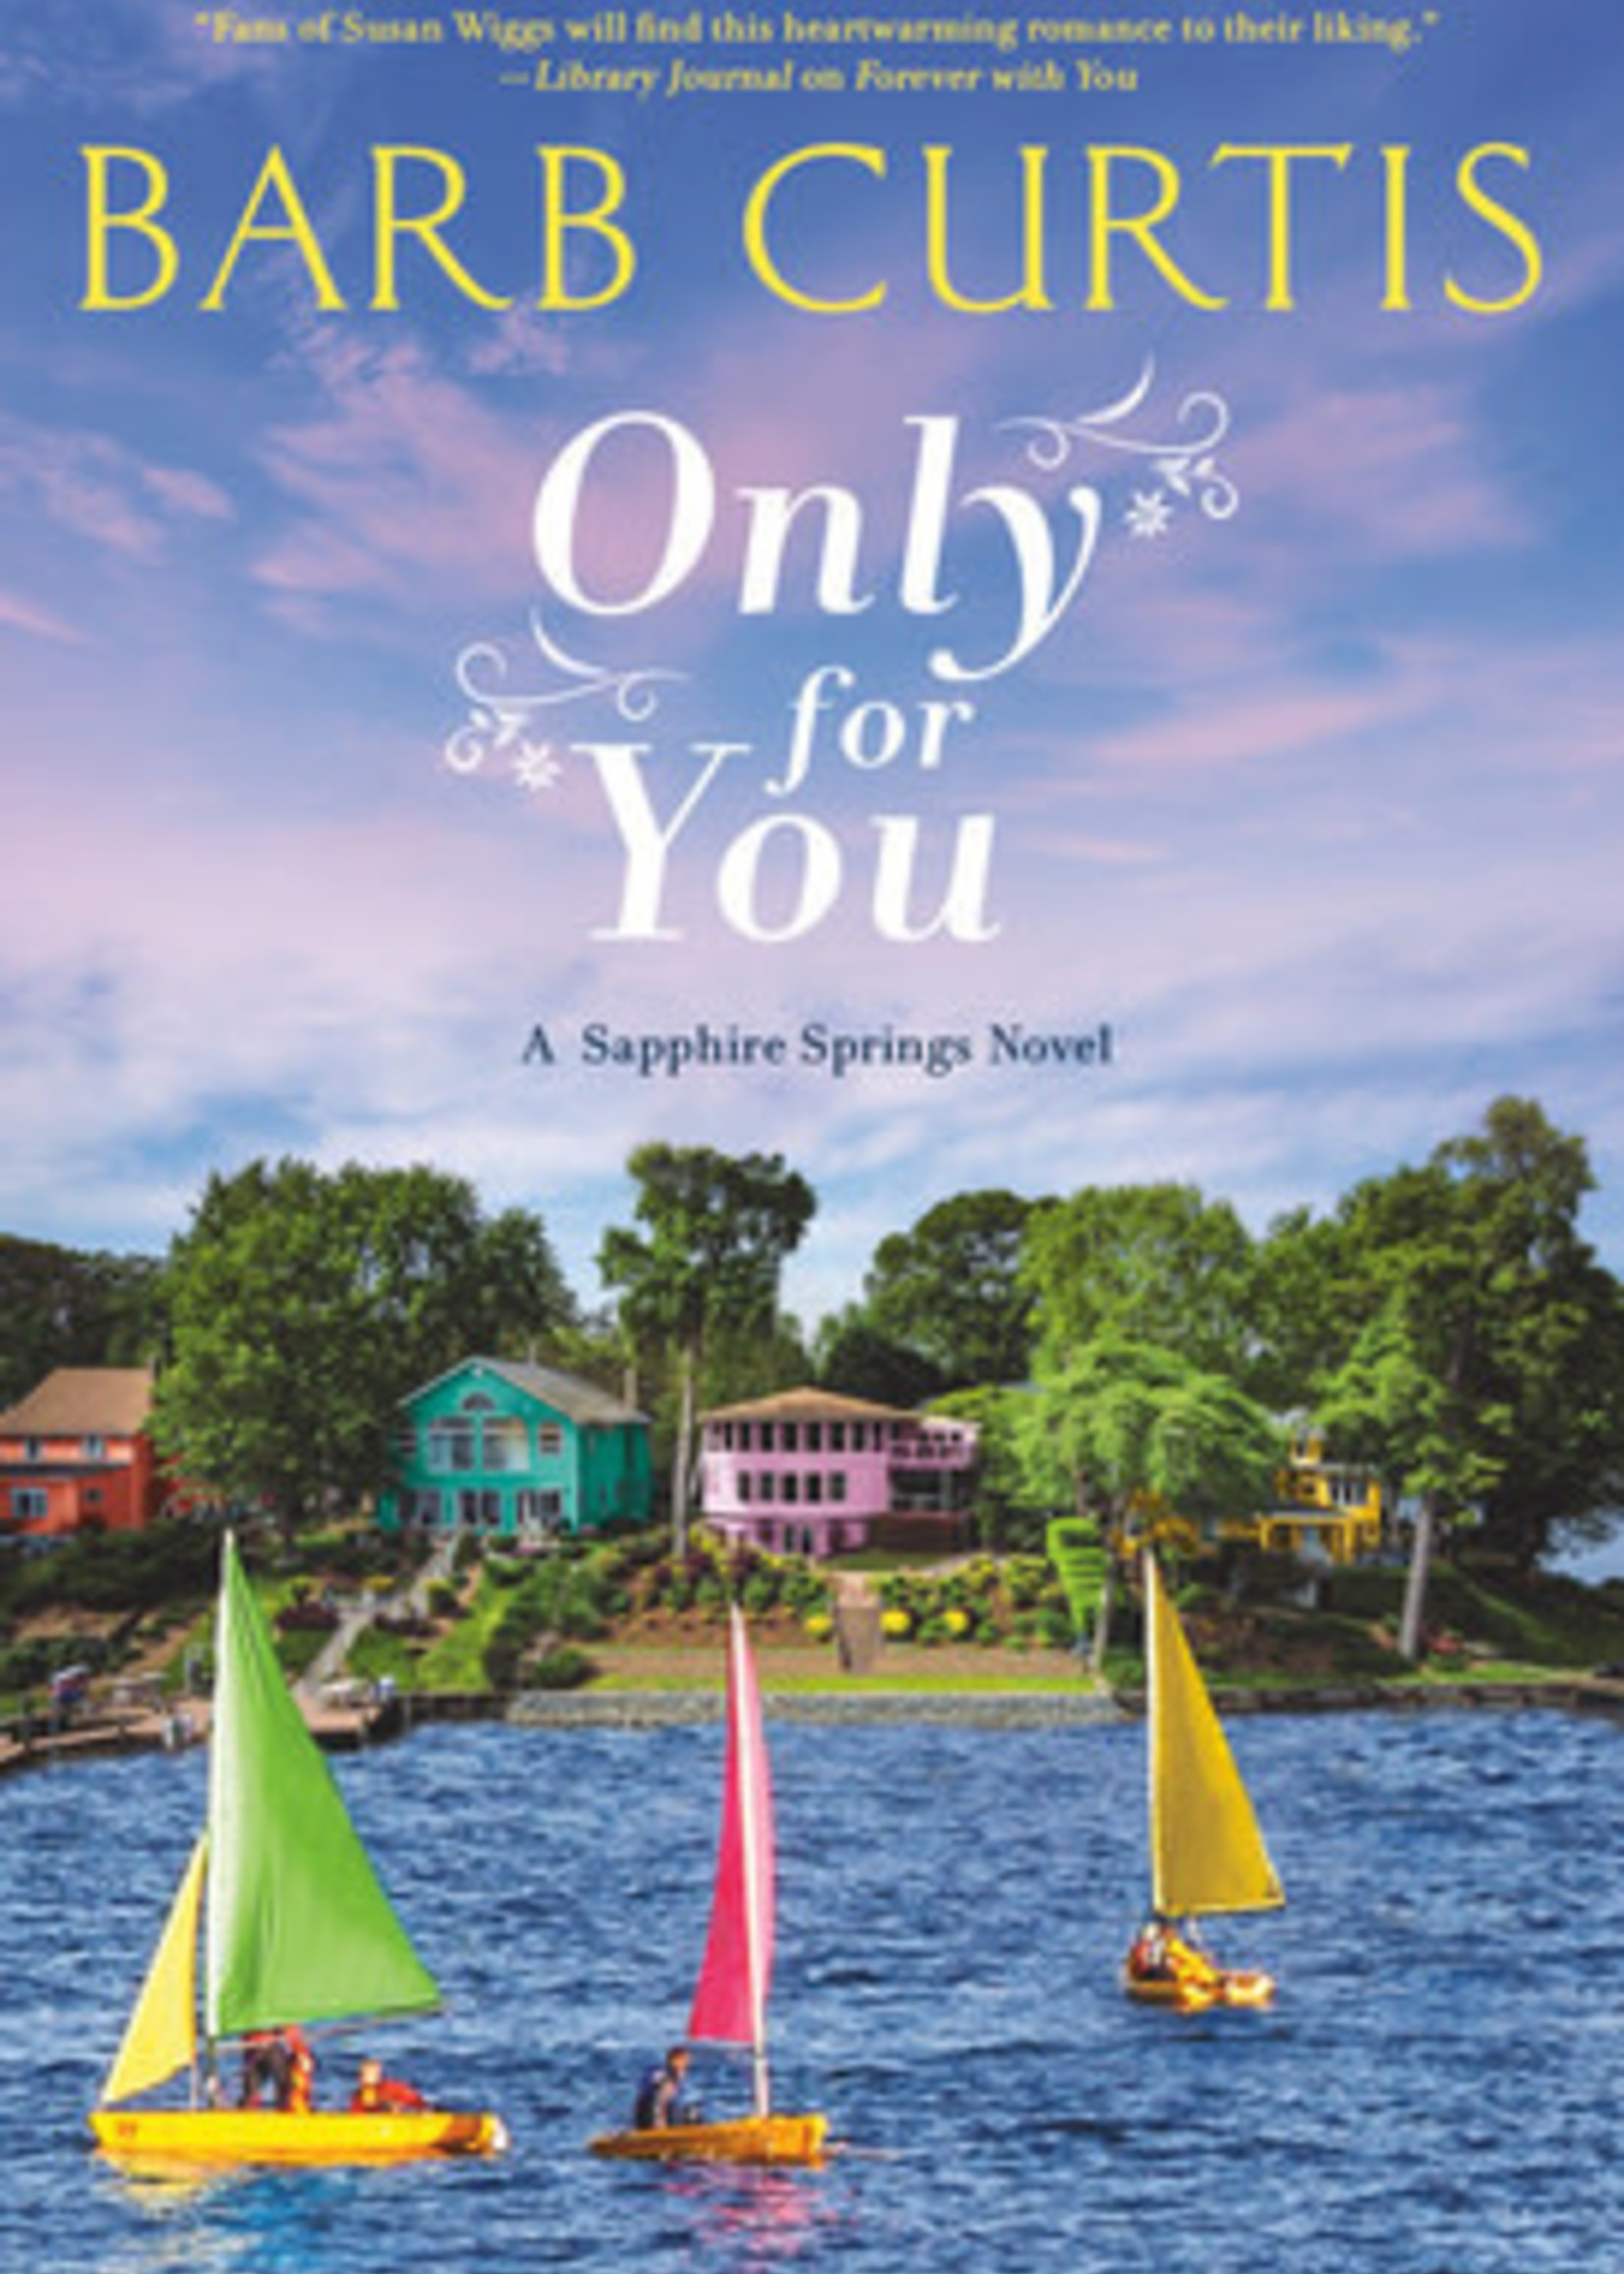 Only for You (Sapphire Springs #2) by Barb Curtis